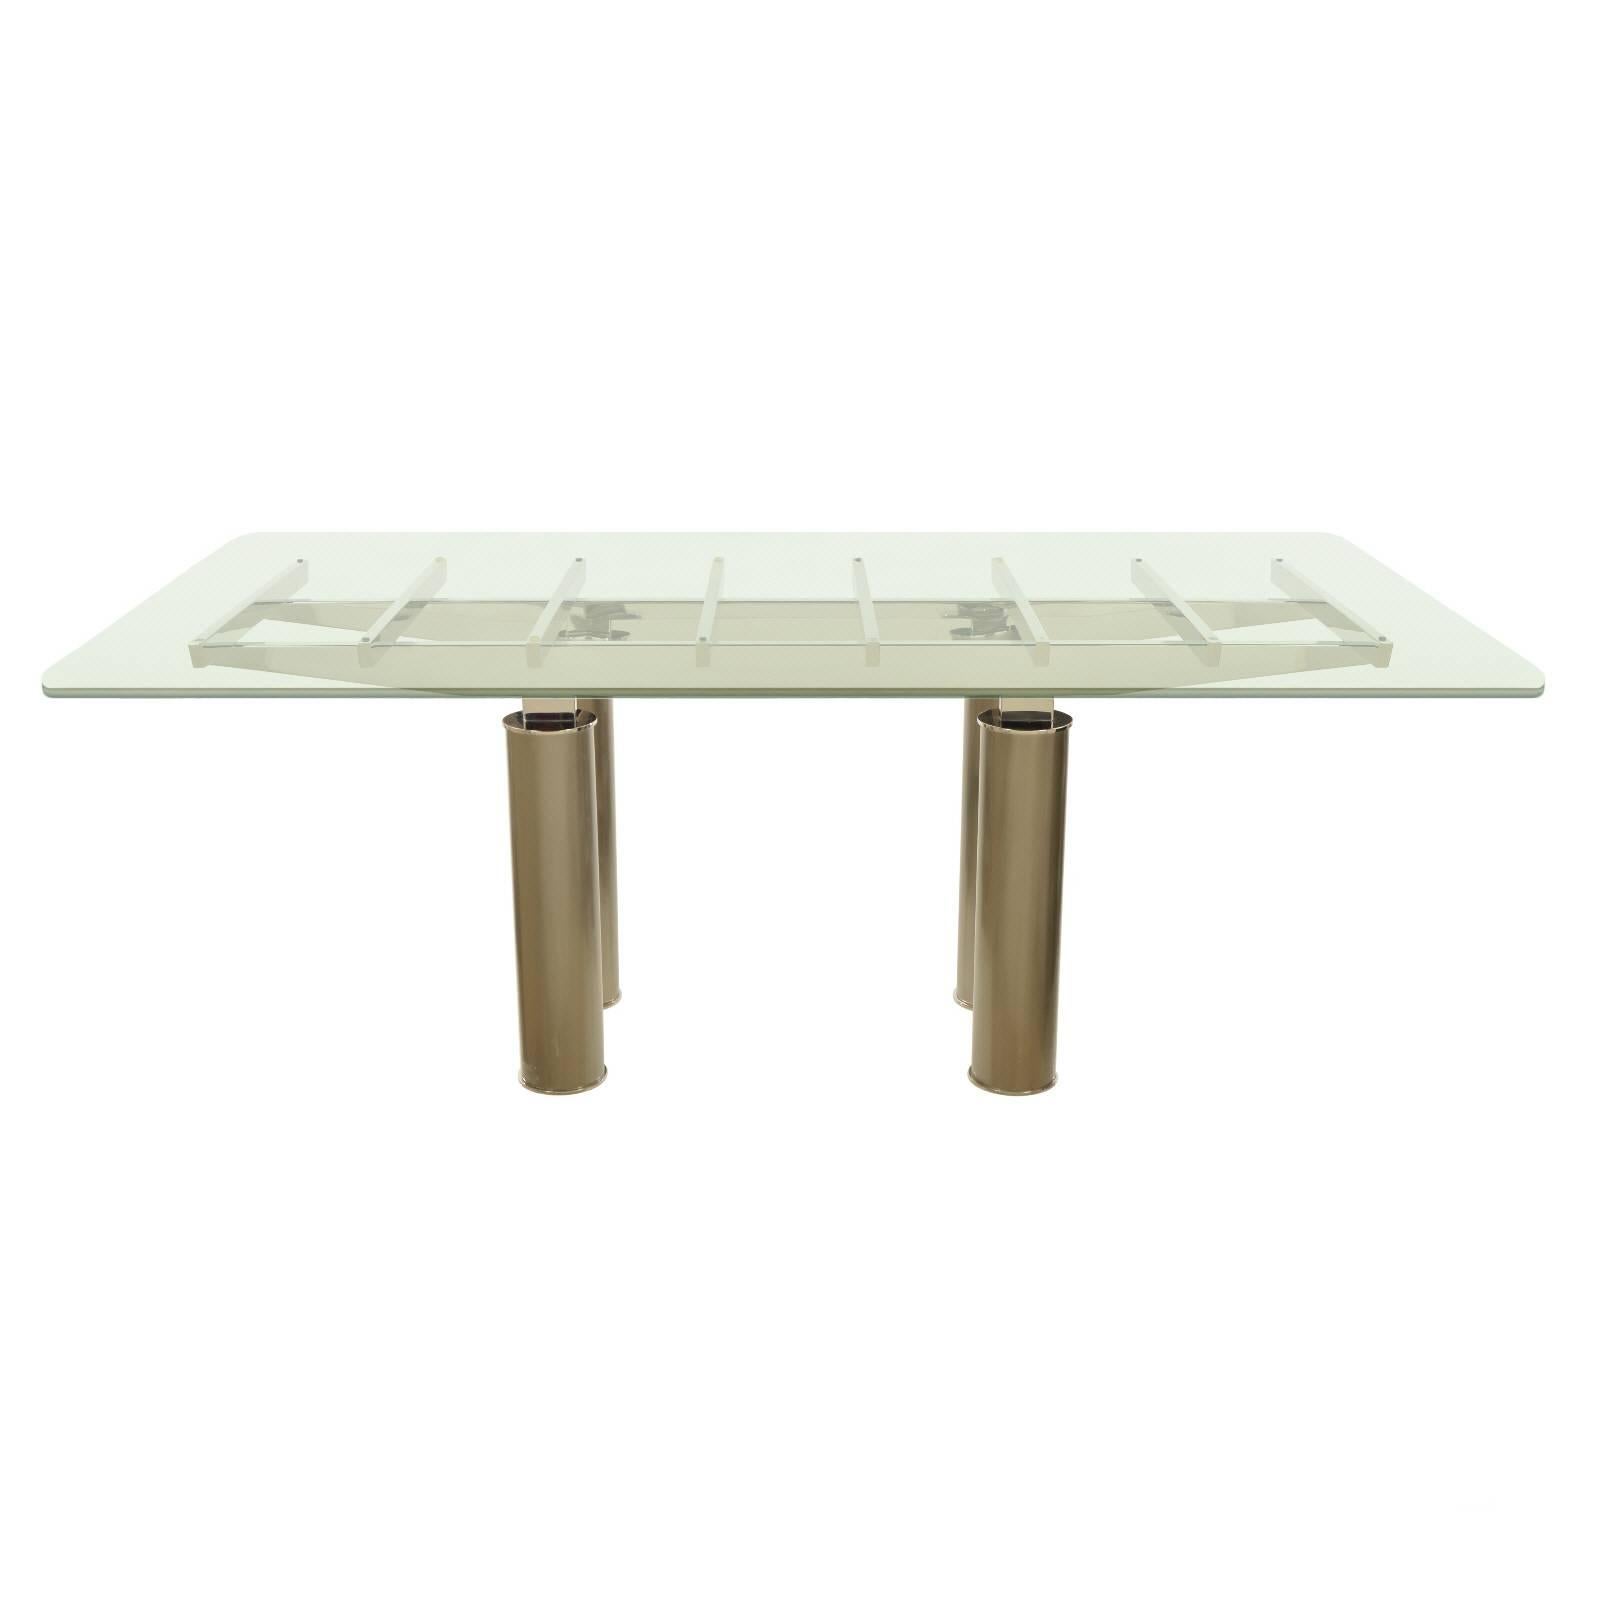 Brueton Glass, Chrome and Stainless Steel Dining Table by Tamarkin-Techler Group For Sale